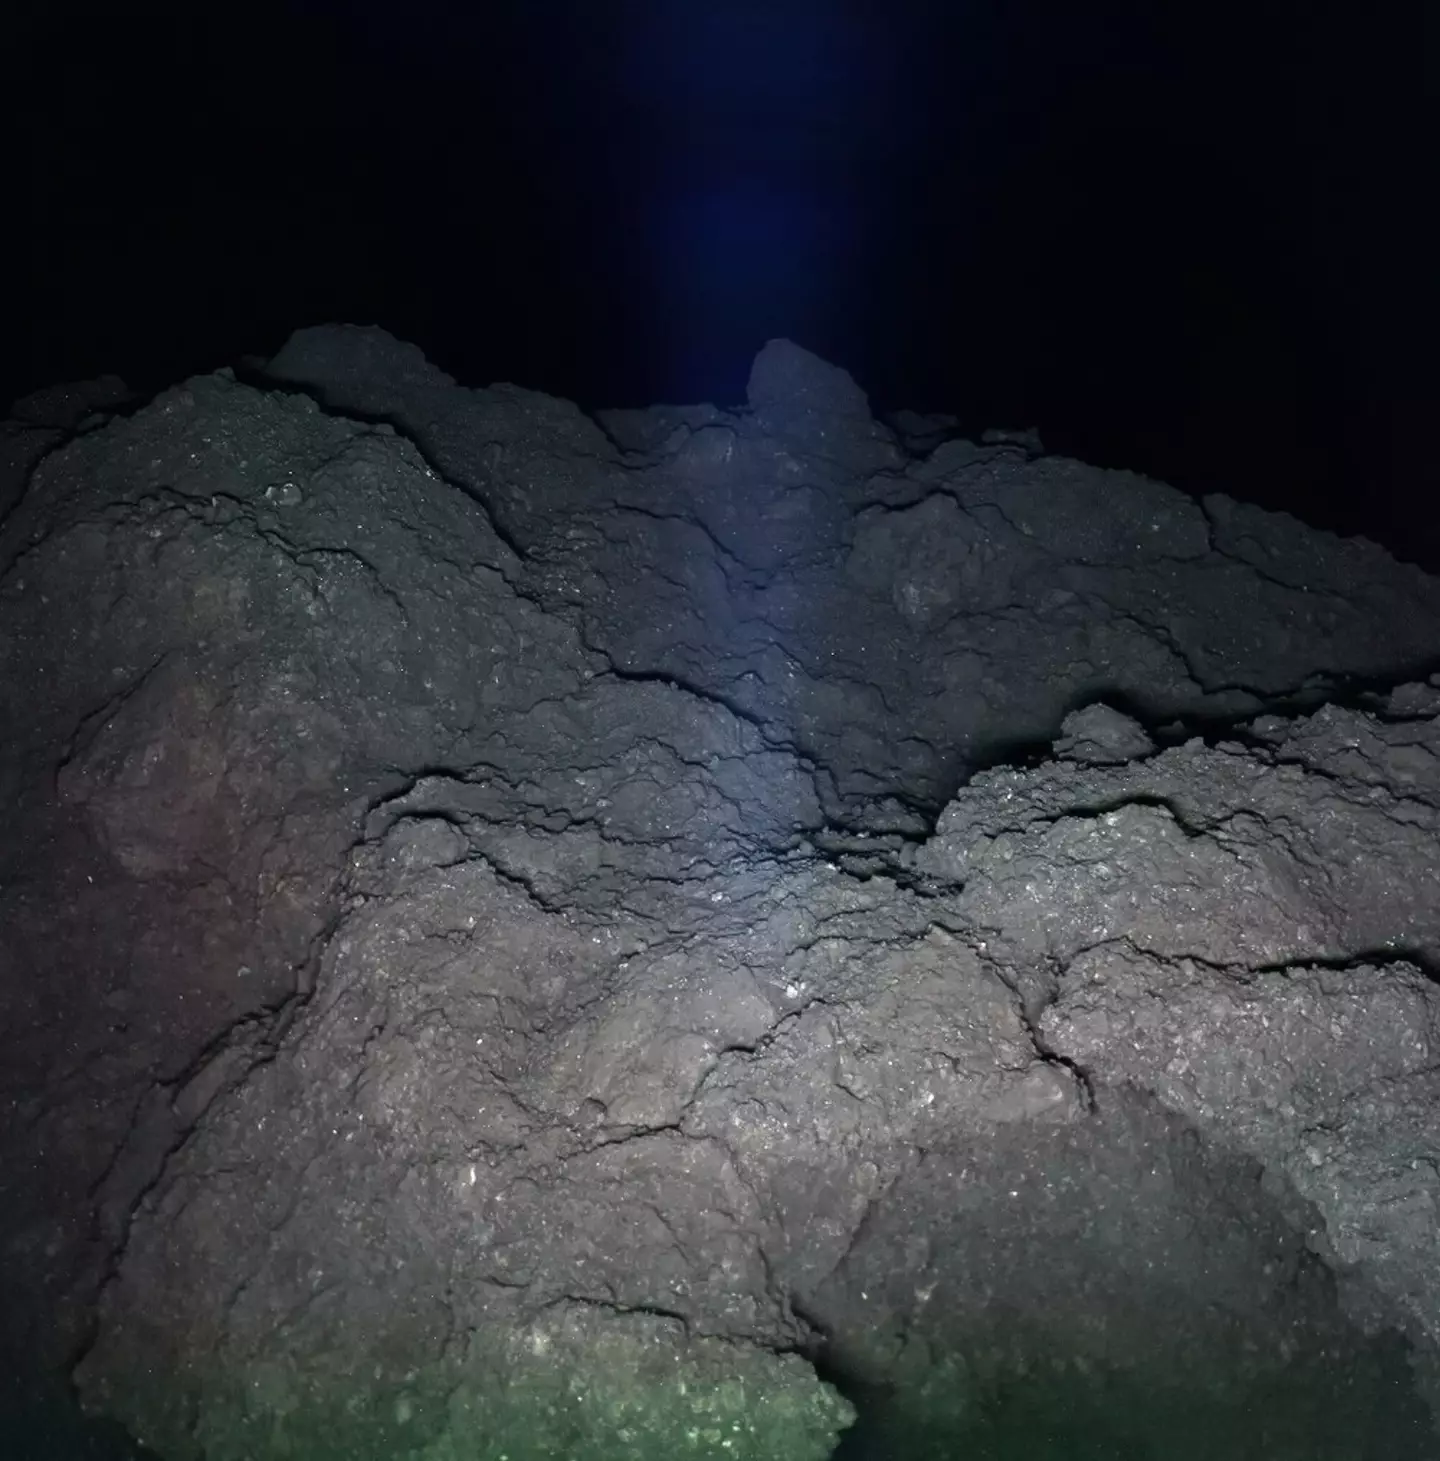 Images of the Ryugu asteroid have been released. (